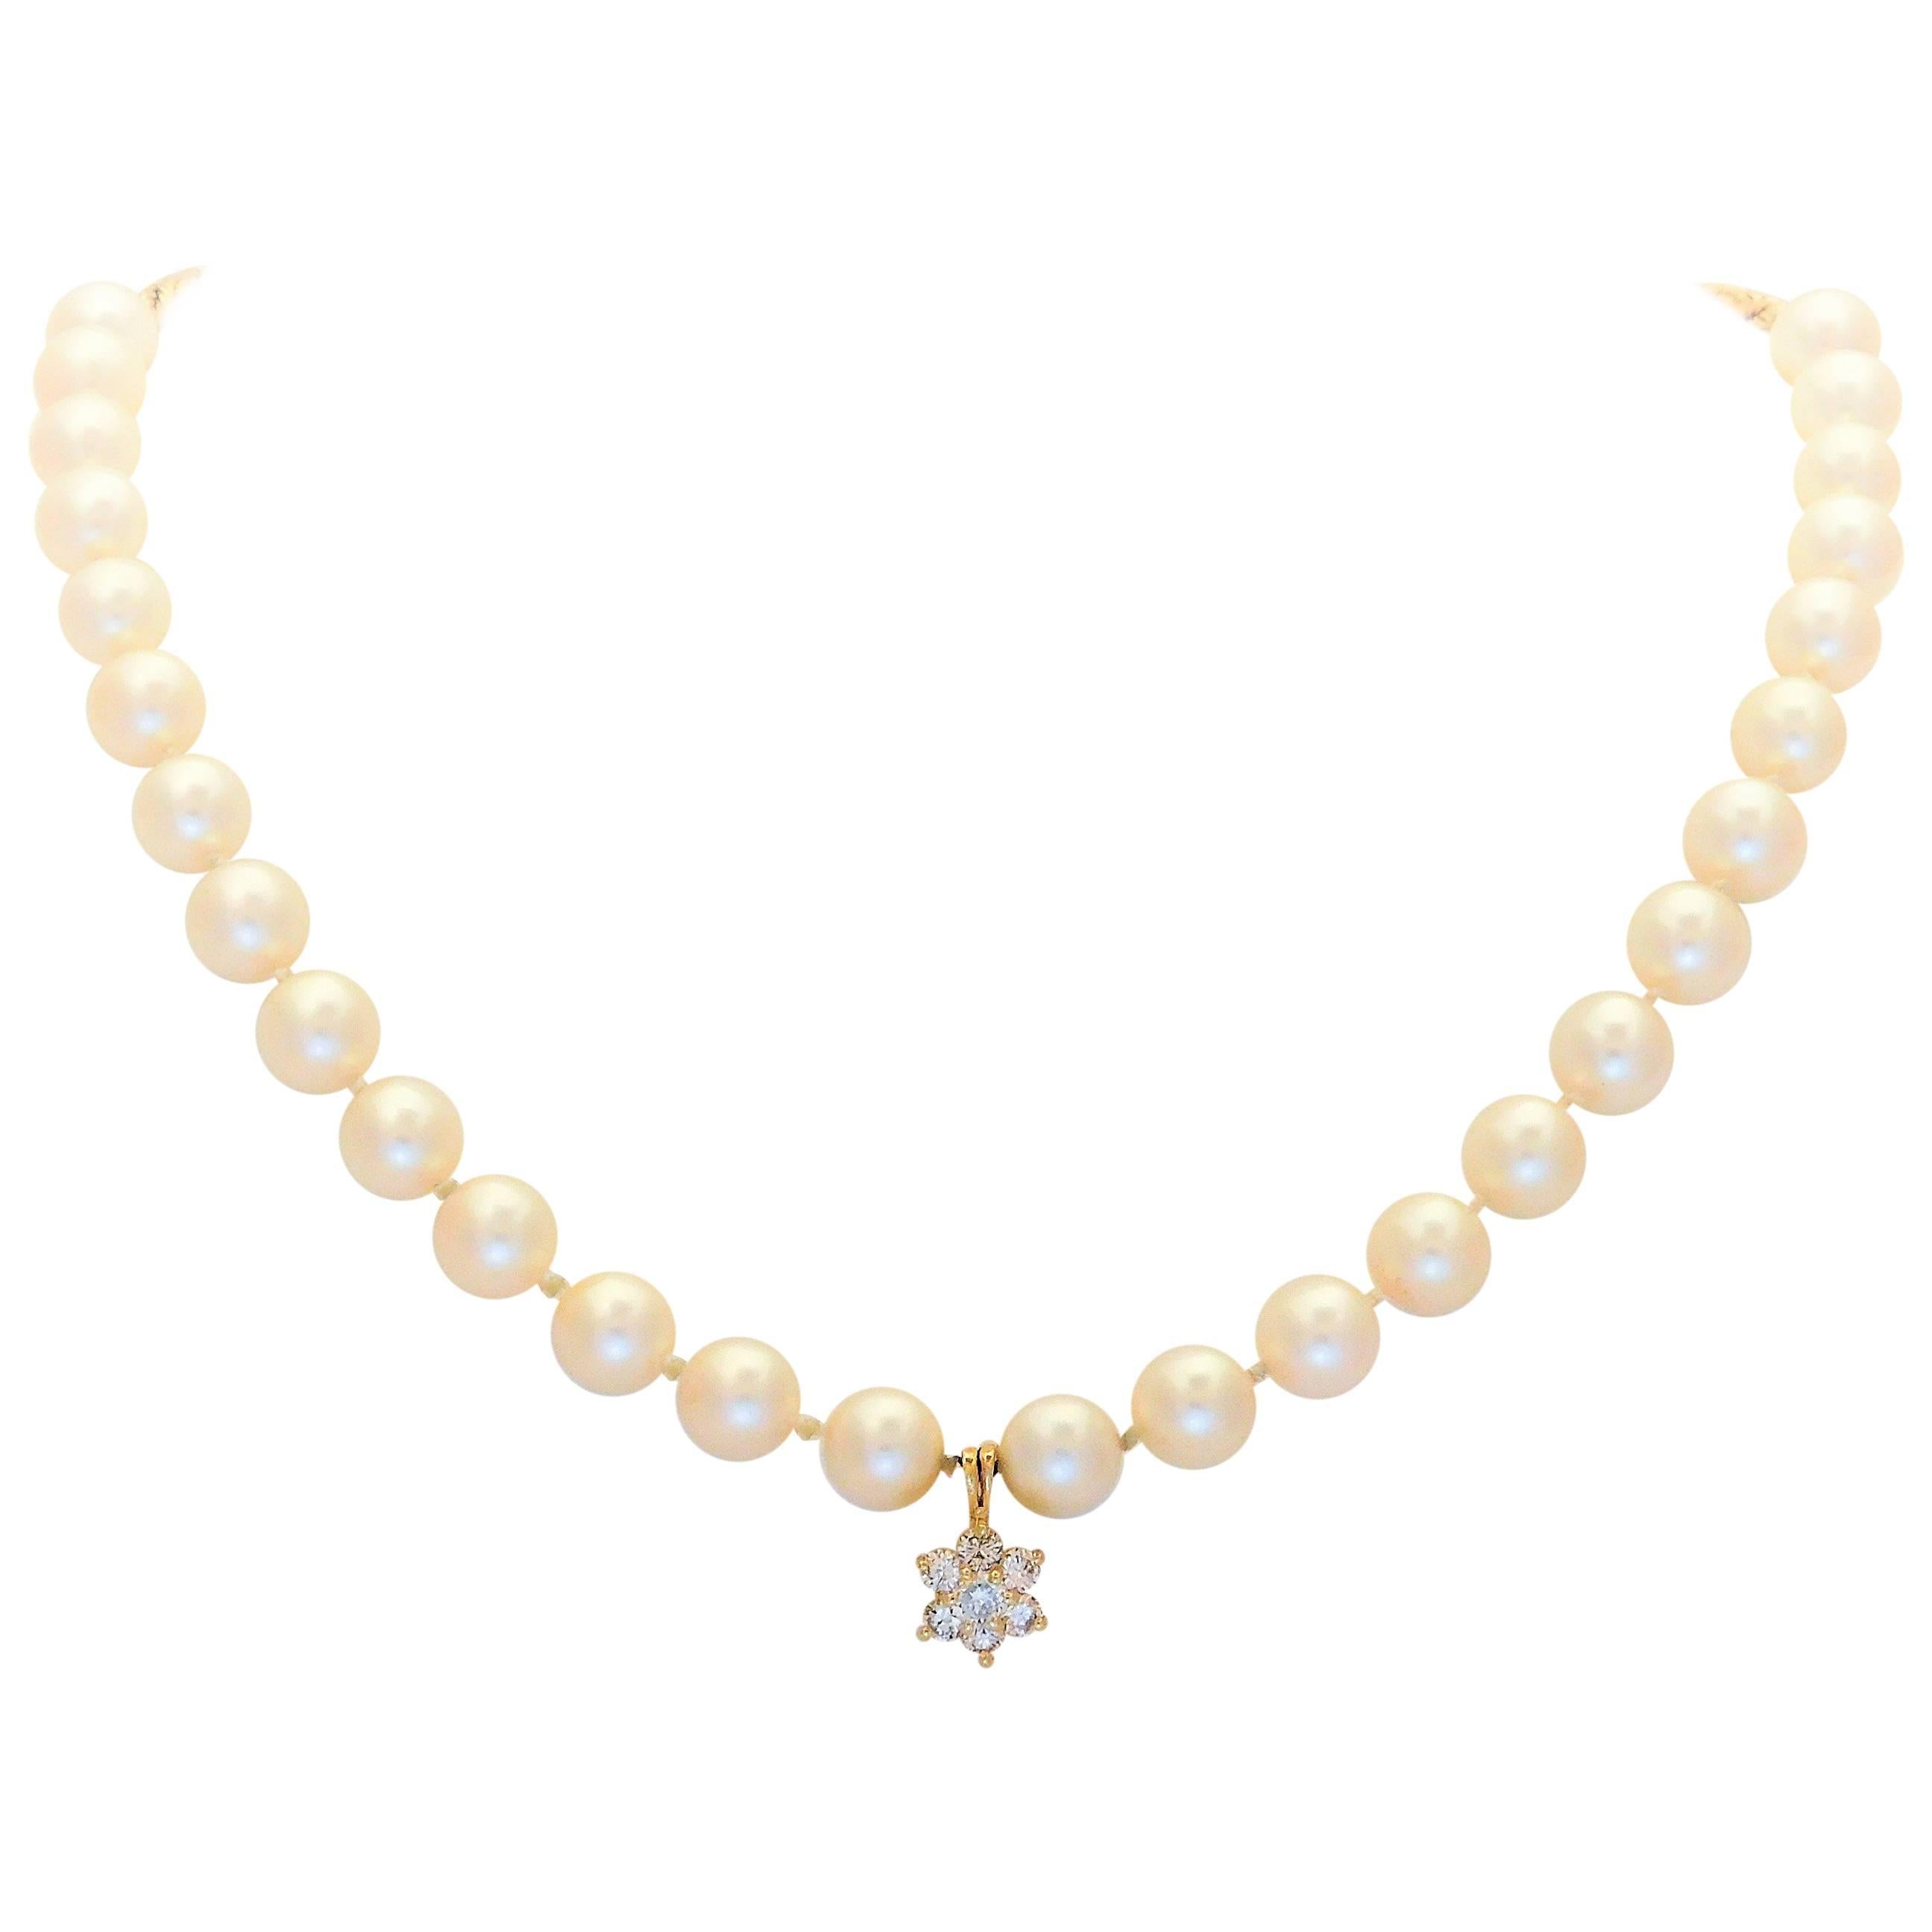 Midcentury White Pearl and 14 Karat Gold Necklace with Diamond Star Pendant